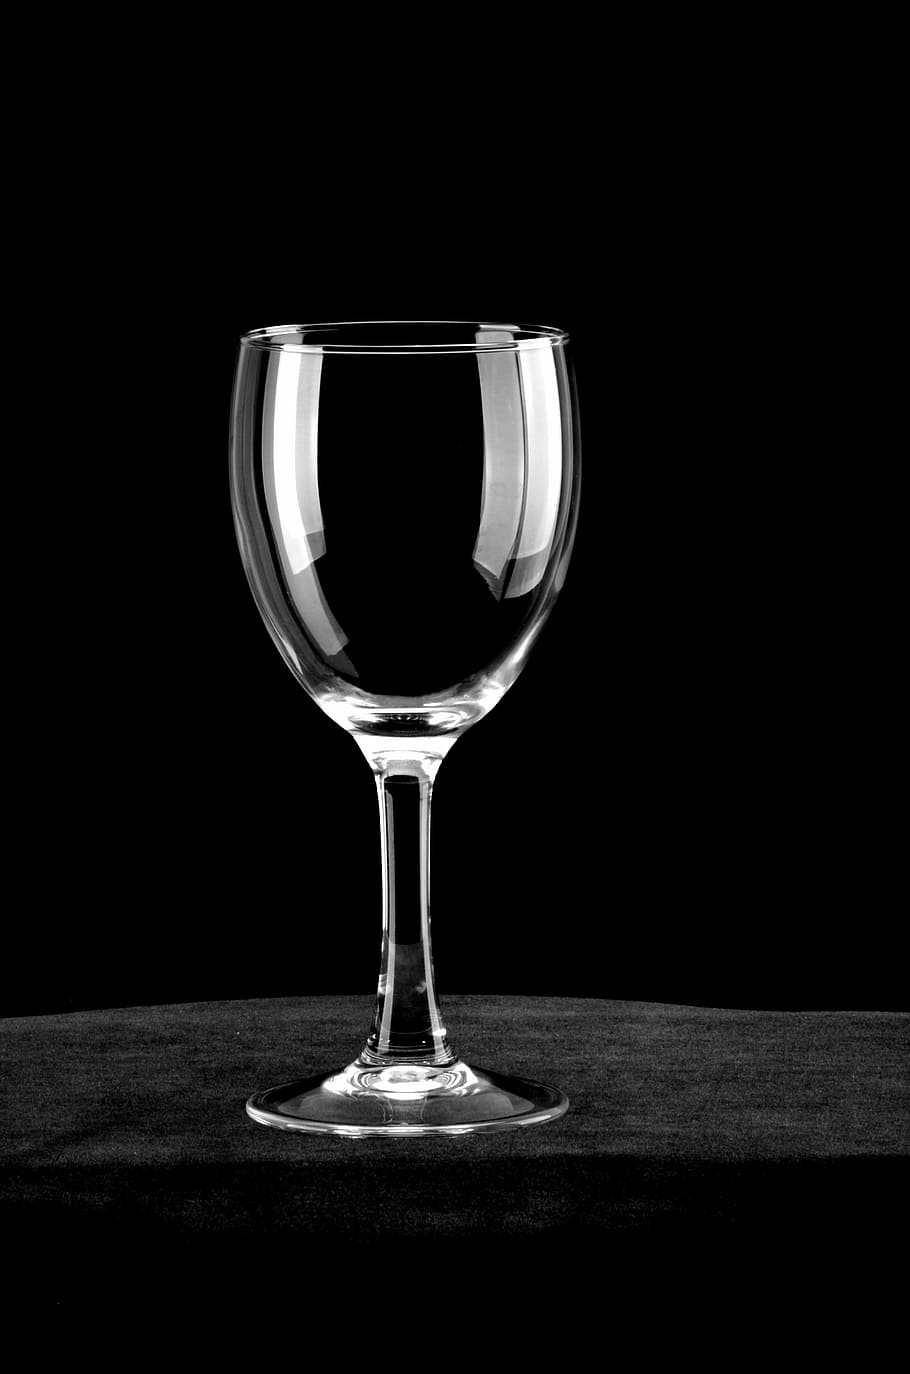 wineglass on table, glass, white stripes, goblet, red wine glass, wineglass, drinking Glass, black Background, alcohol, black Color